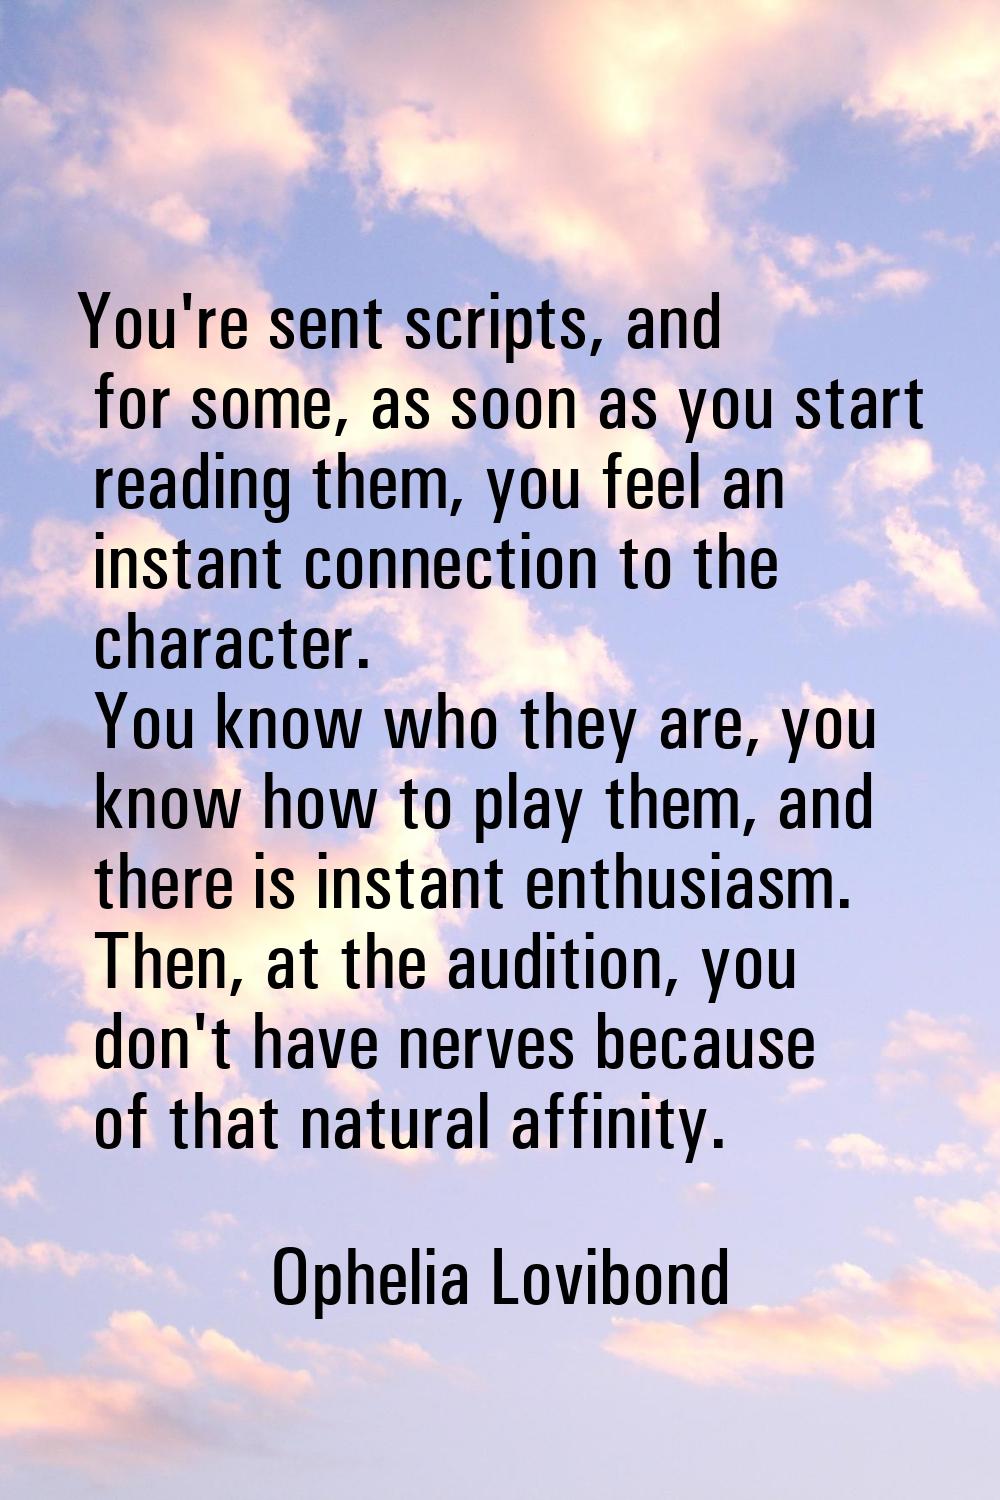 You're sent scripts, and for some, as soon as you start reading them, you feel an instant connectio